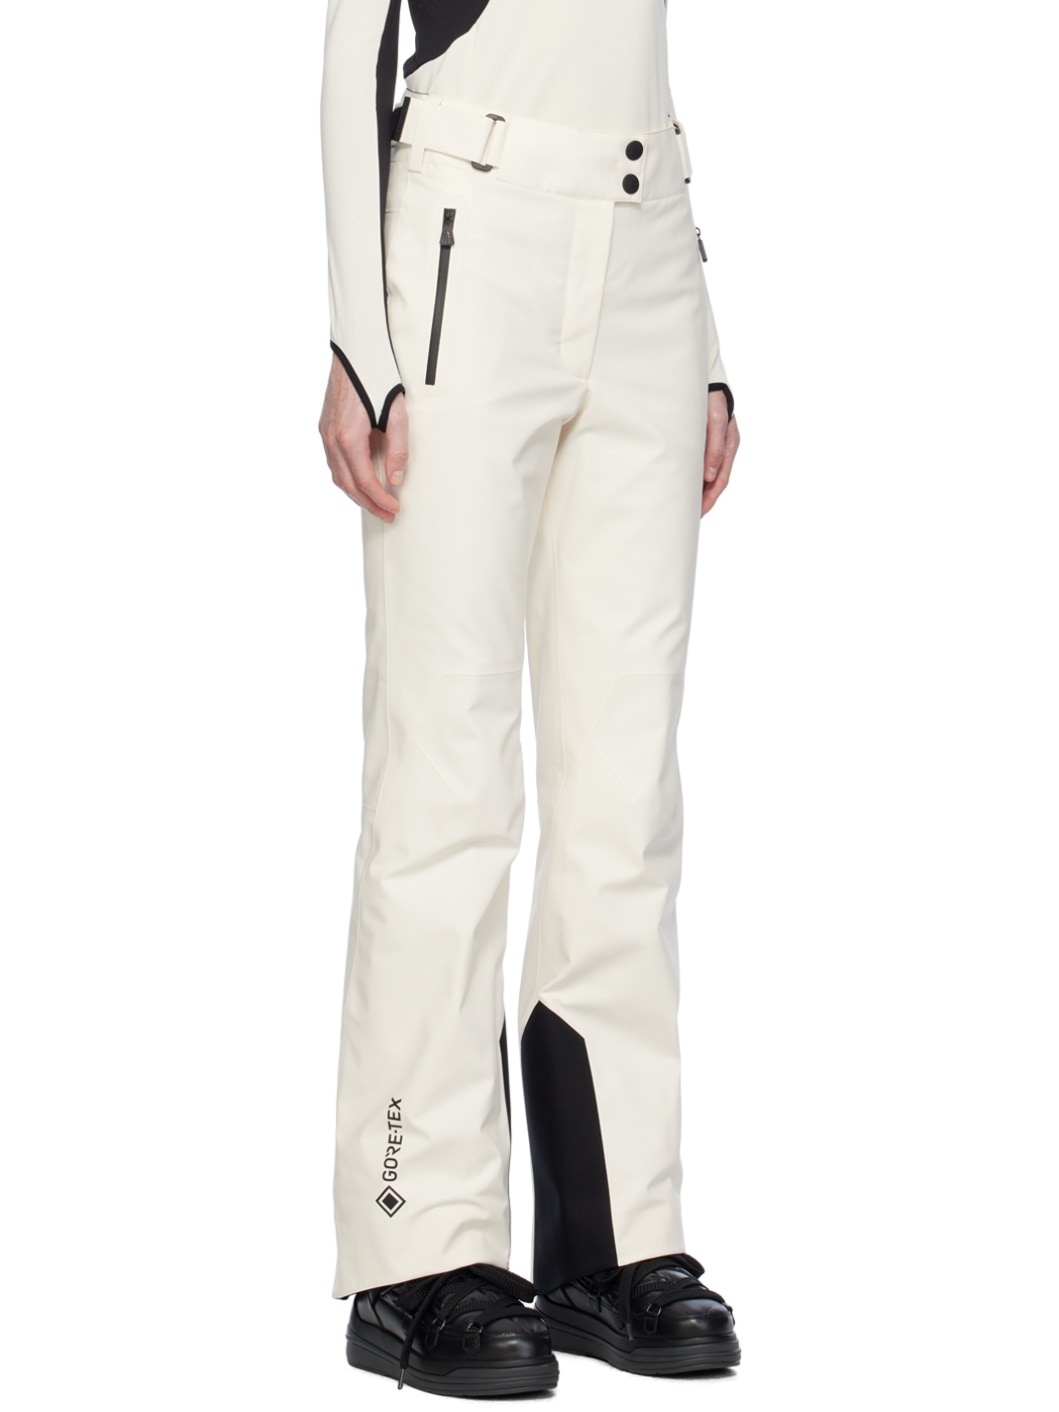 Off-White Gore-Tex Trousers - 2